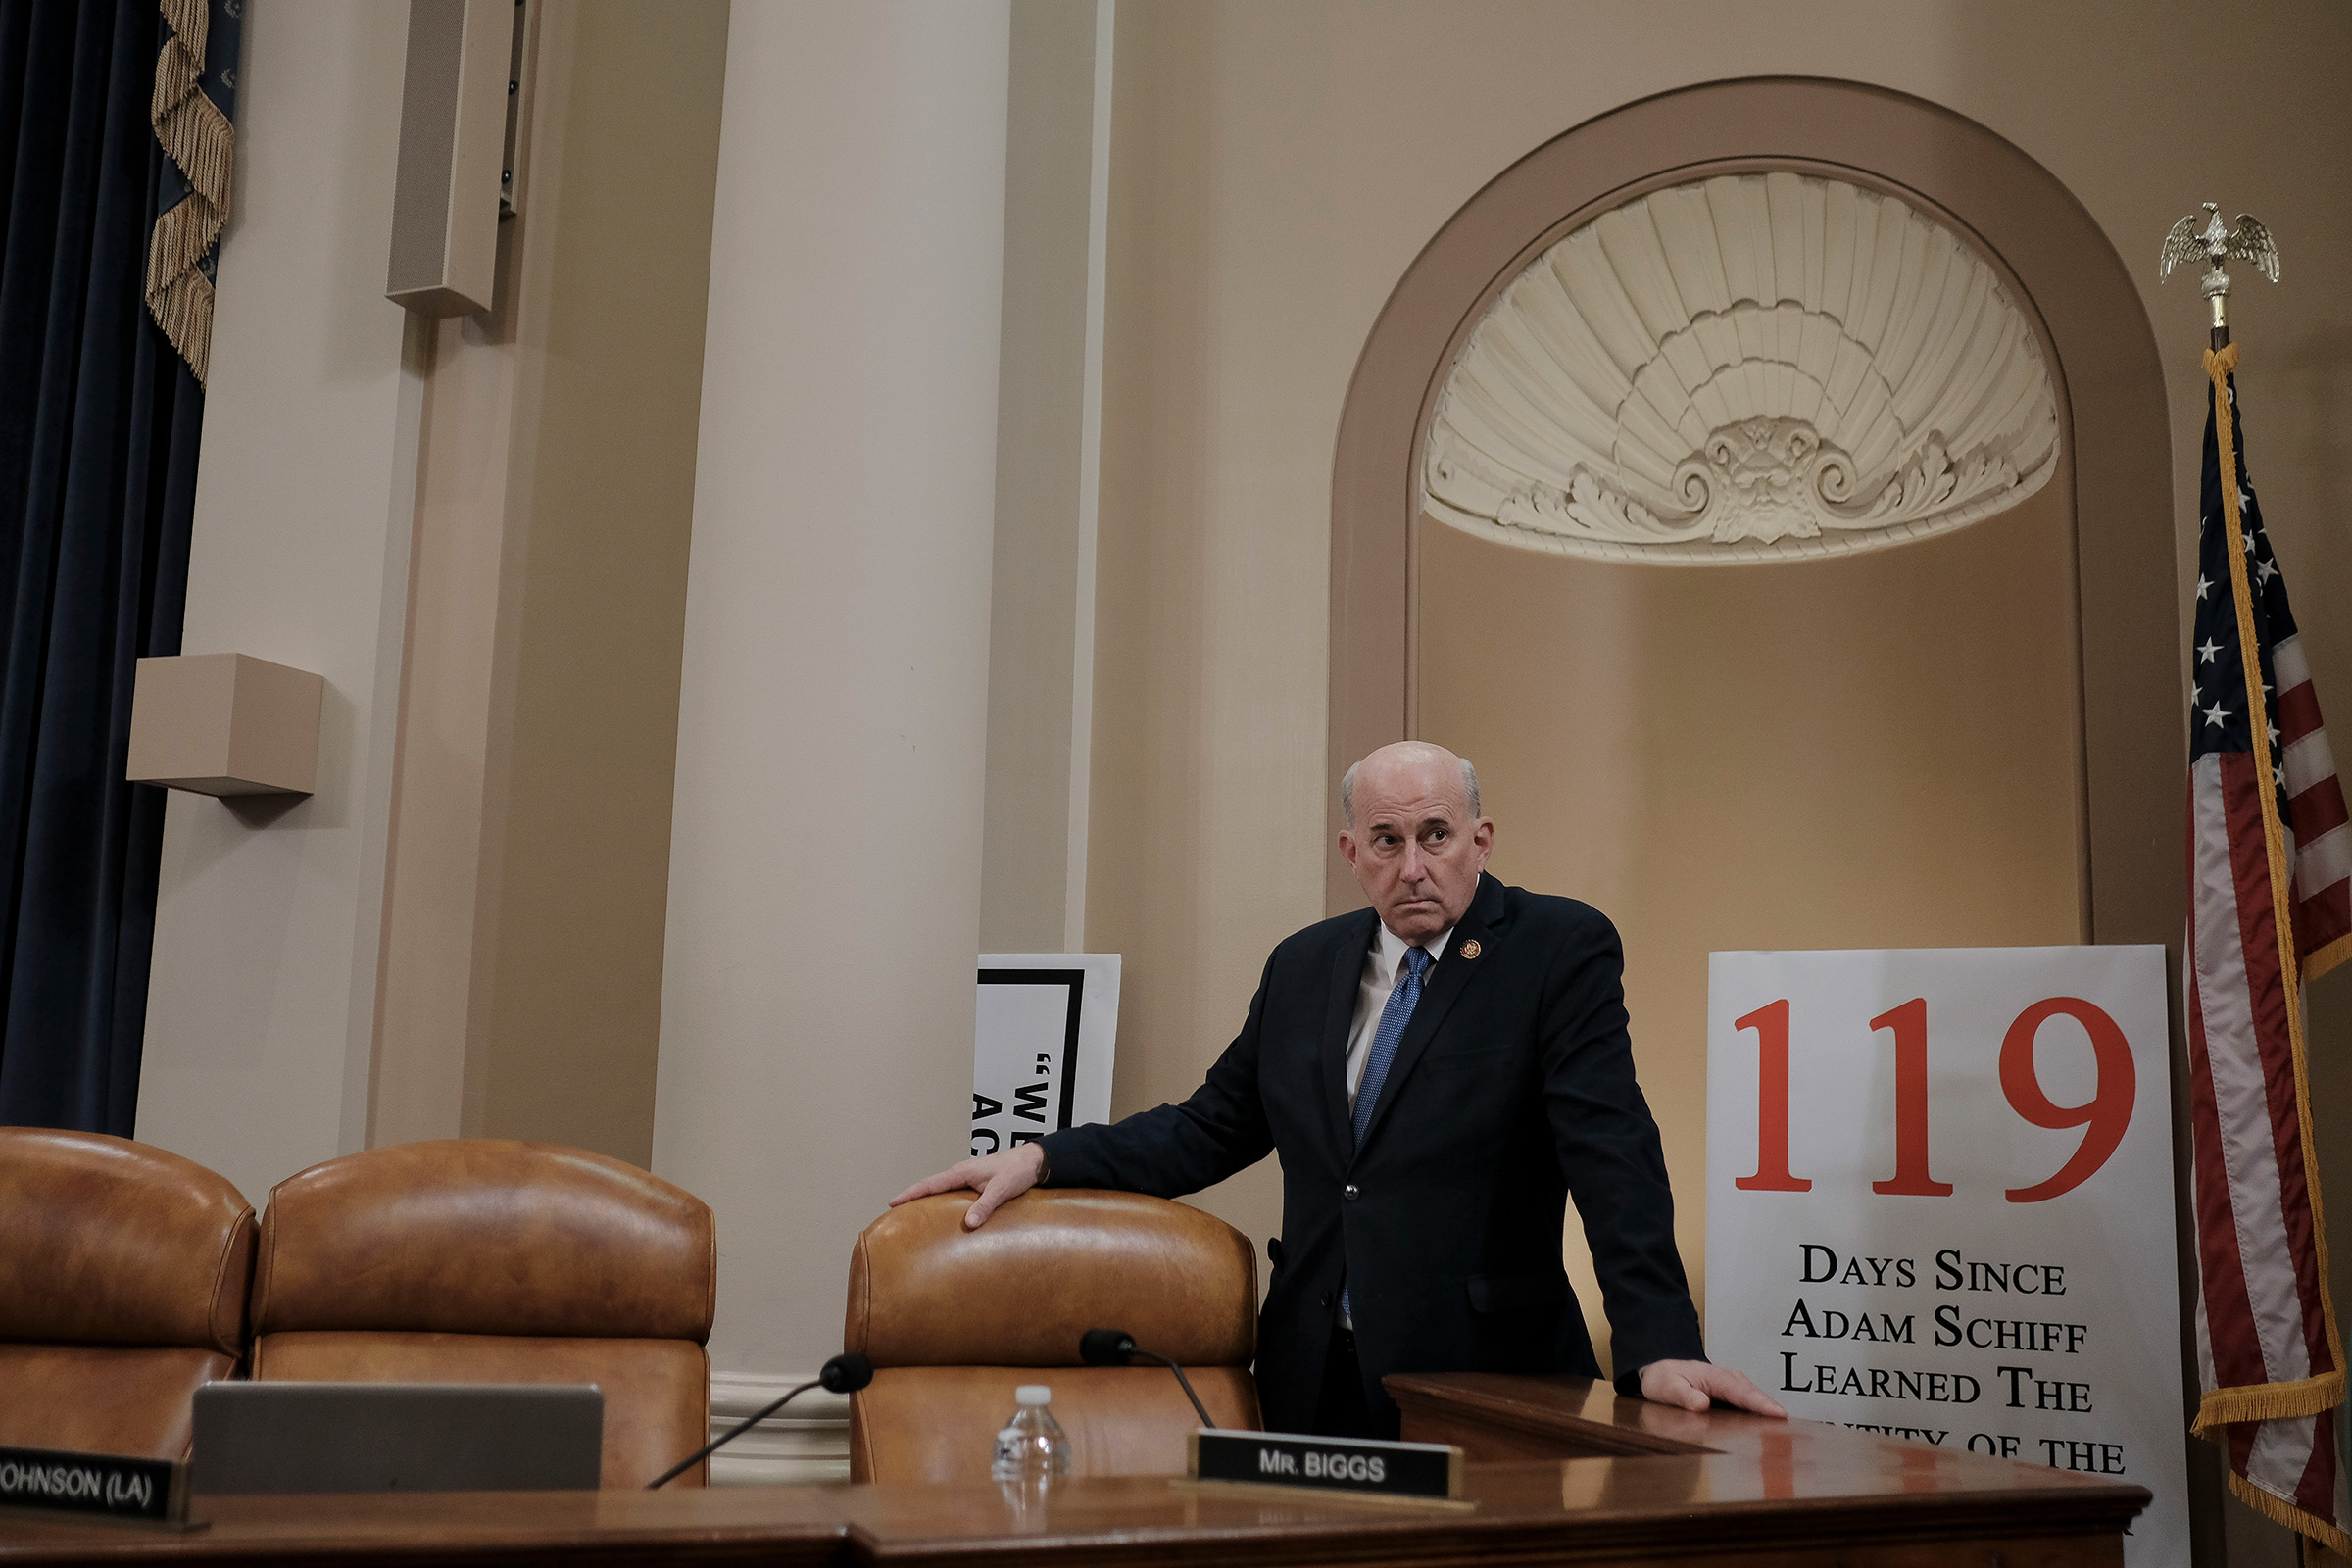 D.C. Rep. Louie Gohmert (R-Texas) settles in before the House Judiciary Committee hearing on the impeachment inquiry at the Longworth House Office building on Capitol Hill in Washington, D.C., on Dec. 9, 2019. (Gabriella Demczuk for TIME)